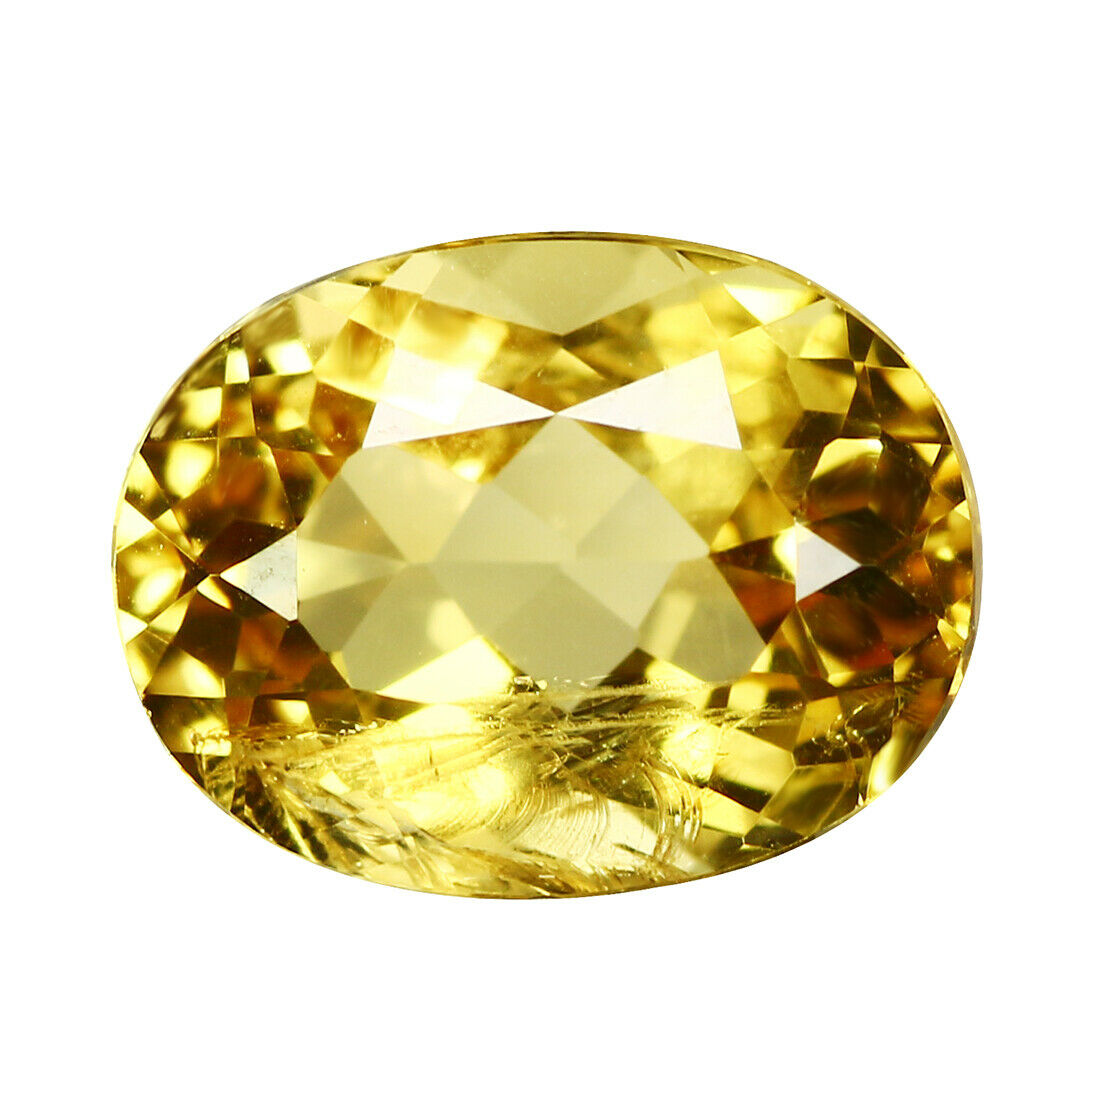 2.18ct If Pleasant Oval Cut 9 X 7 Mm Natural Aaa Golden Yellow Beryl